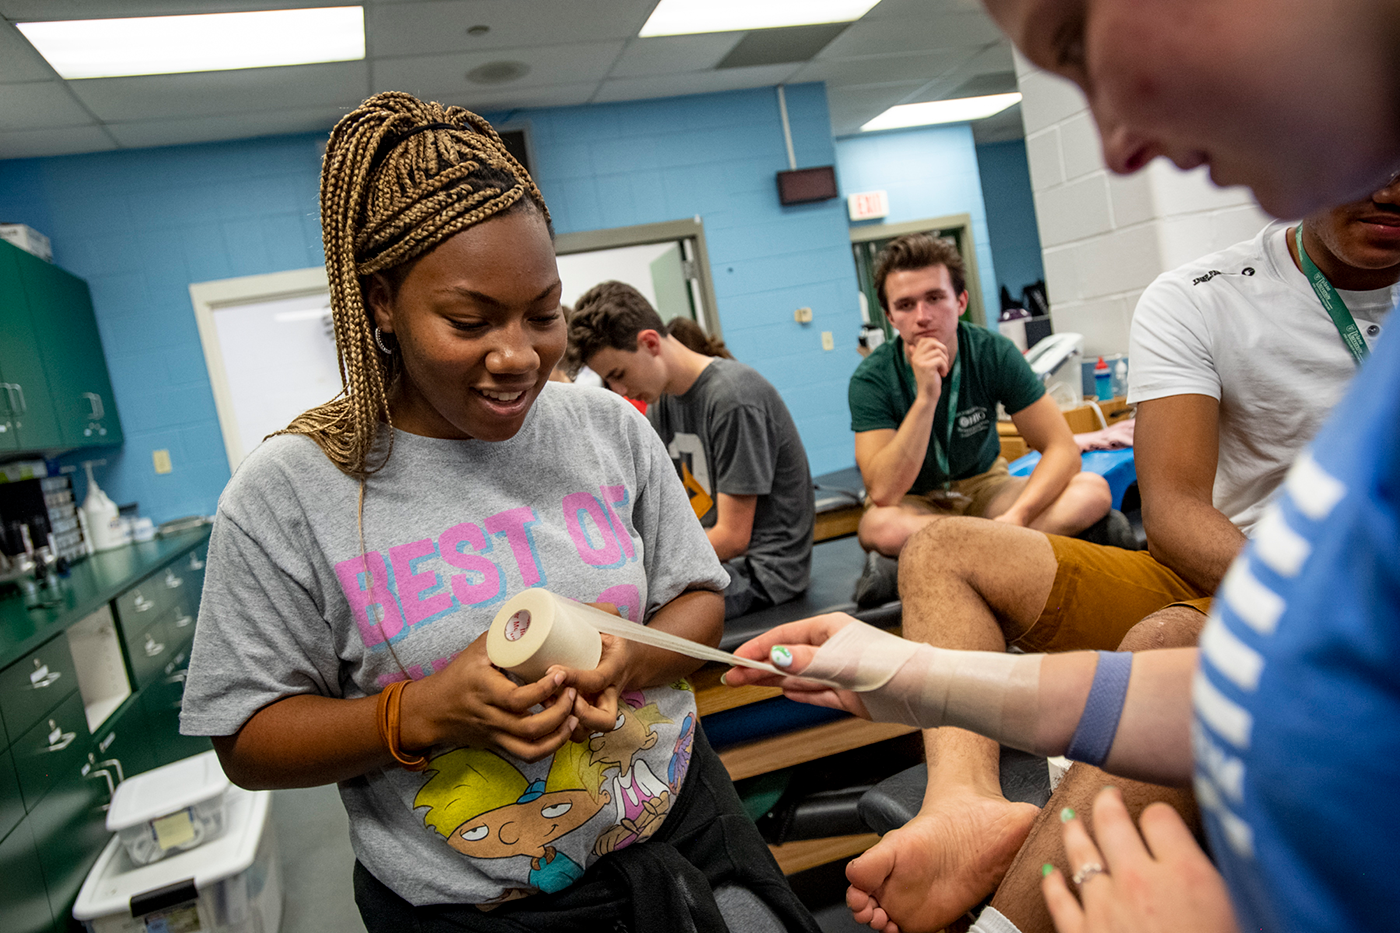 A student practices wrapping an injury in the Sports Medicine class.